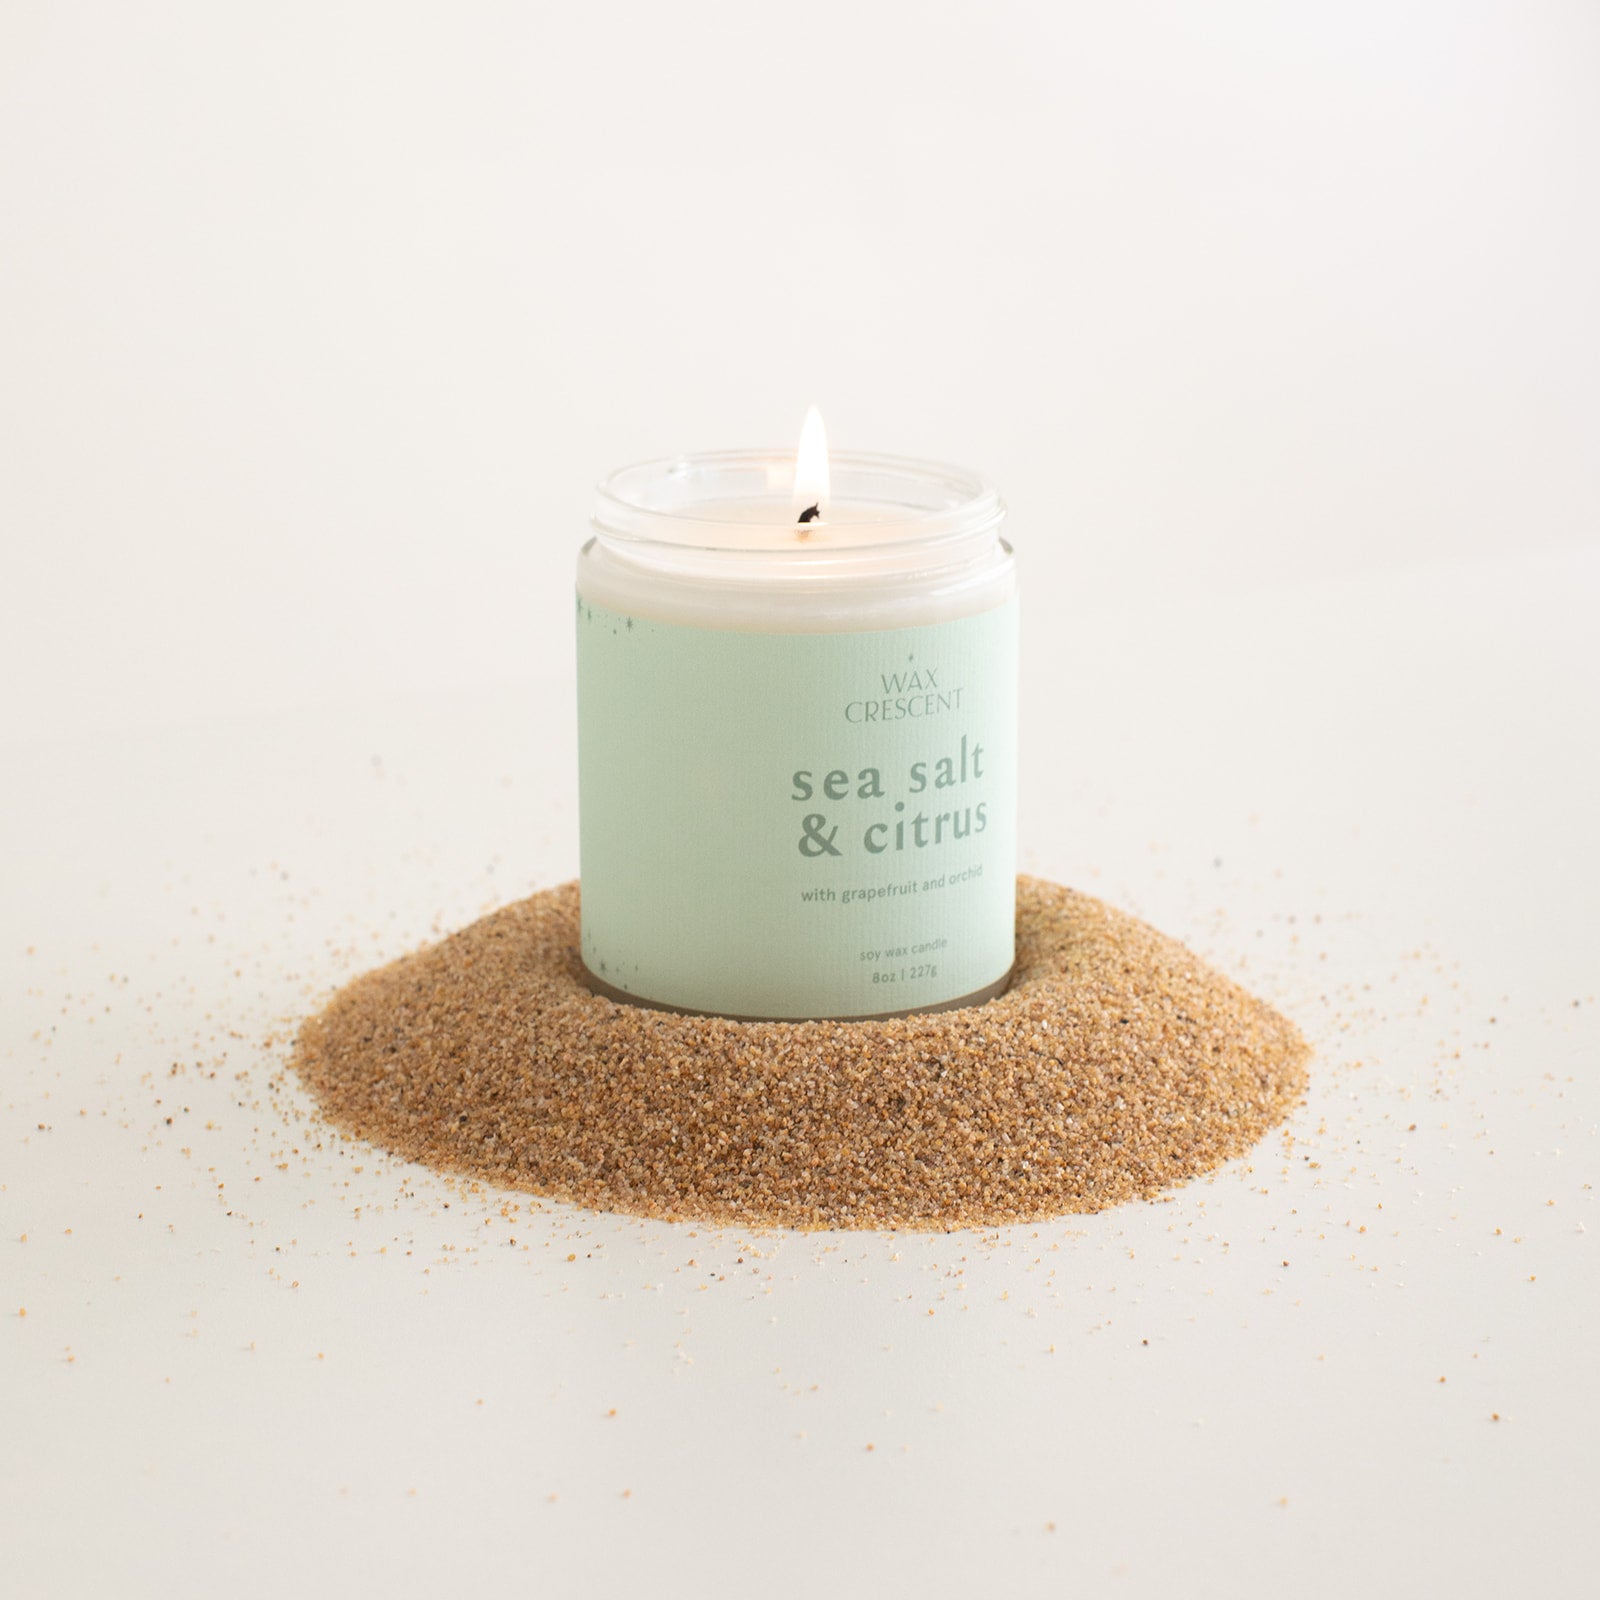 luxury soy wax candle by Wax Crescent 